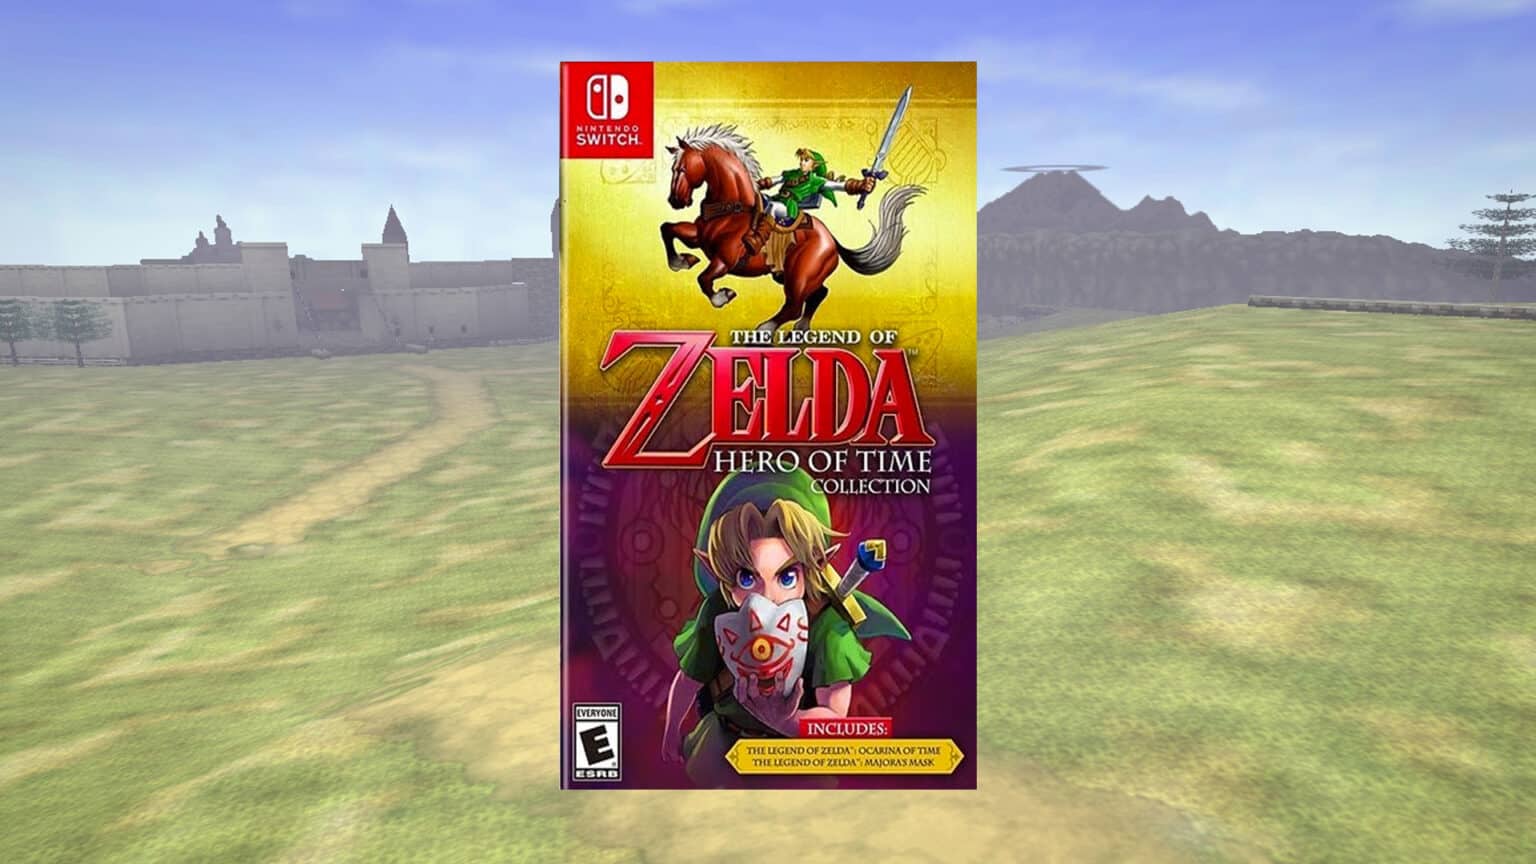 New Zelda Game Could Be The Bestselling Title Of 2021 LaptrinhX / News